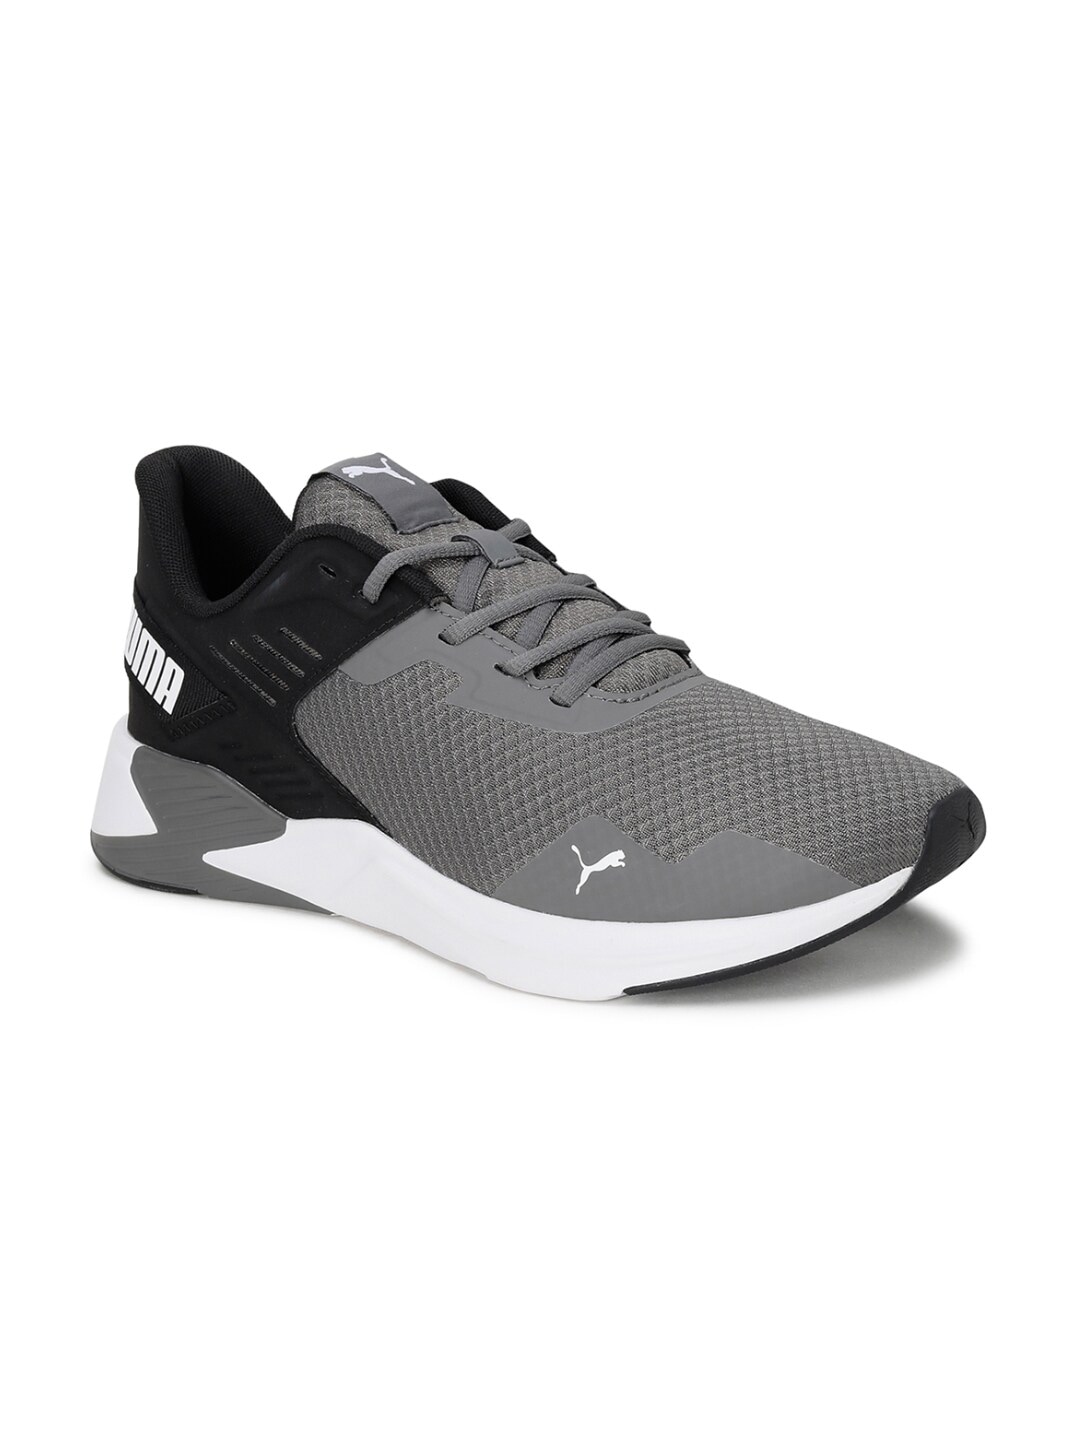 Puma Grey Textile Disperse XT 2 Mesh Training or Gym Shoes Price in India